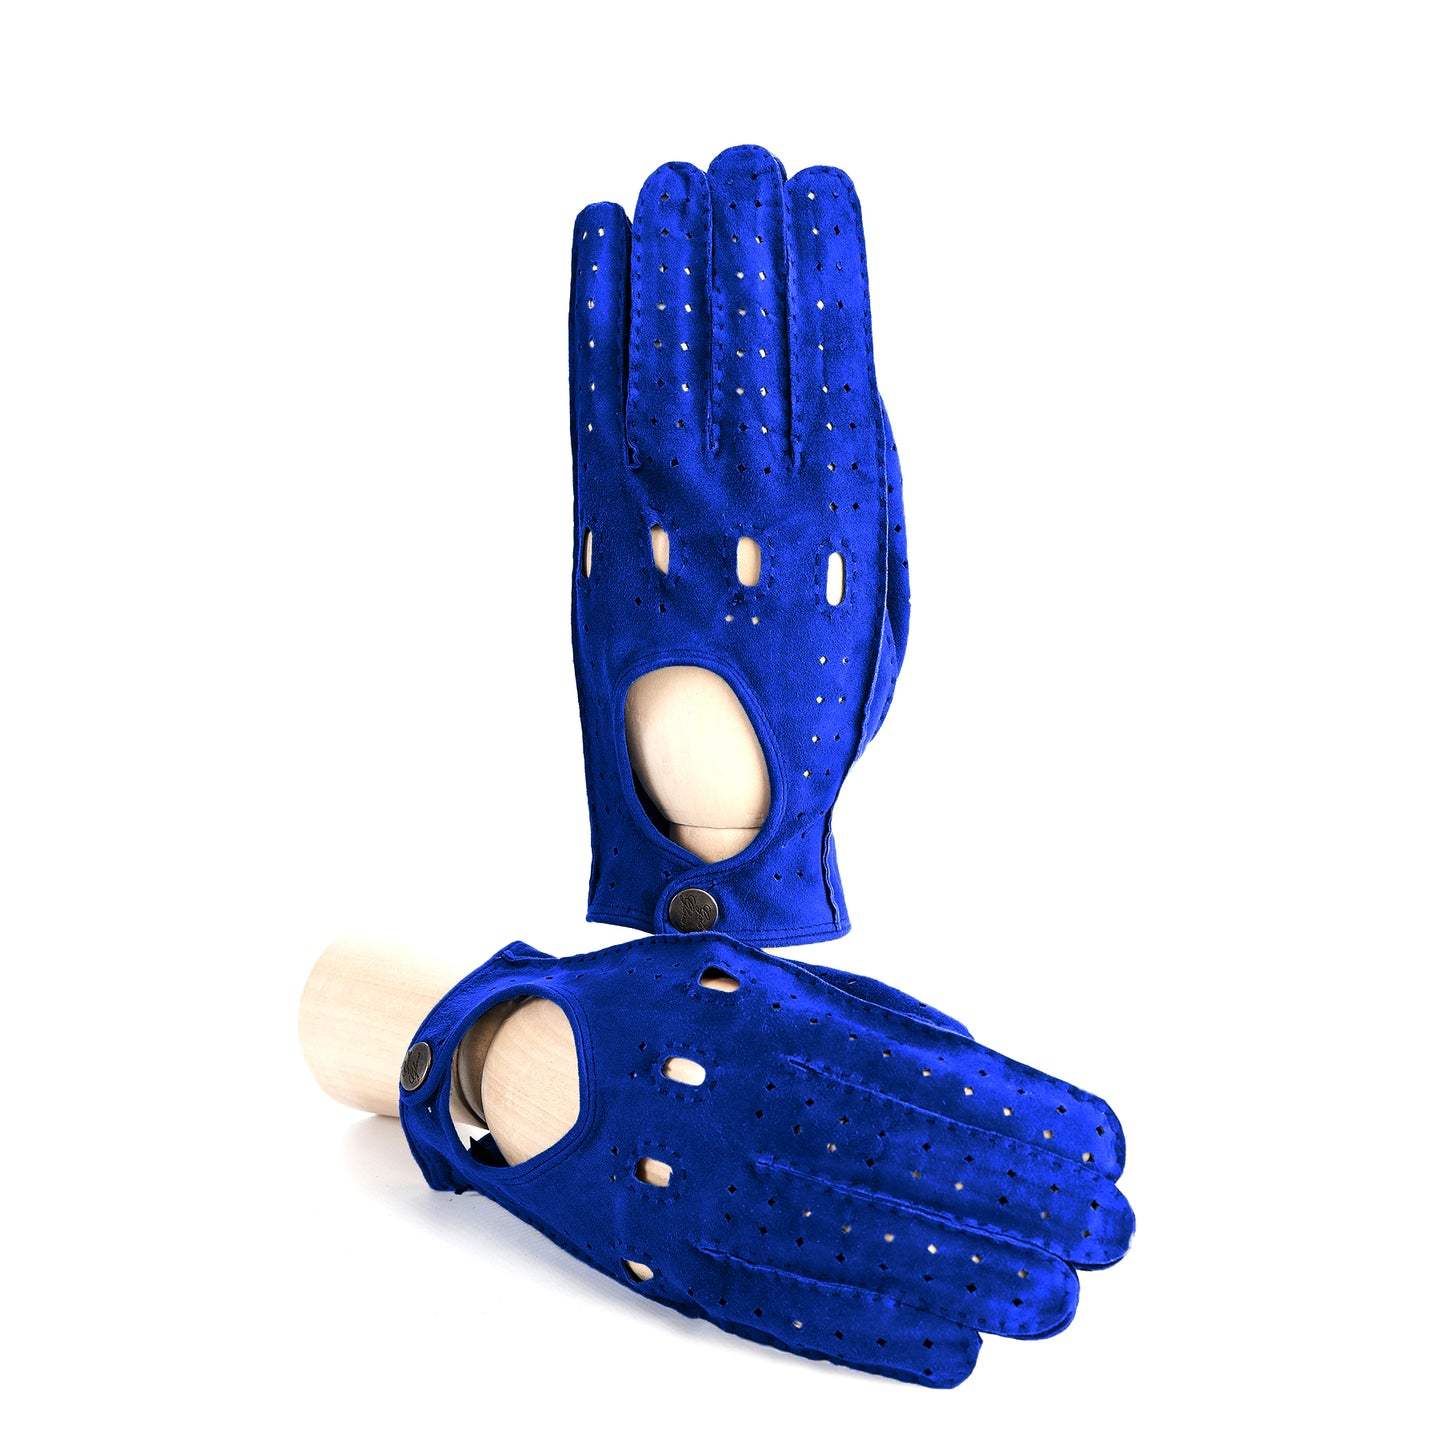 Men's unlined hand-stitched suede driving gloves in elctric blu color with button closure